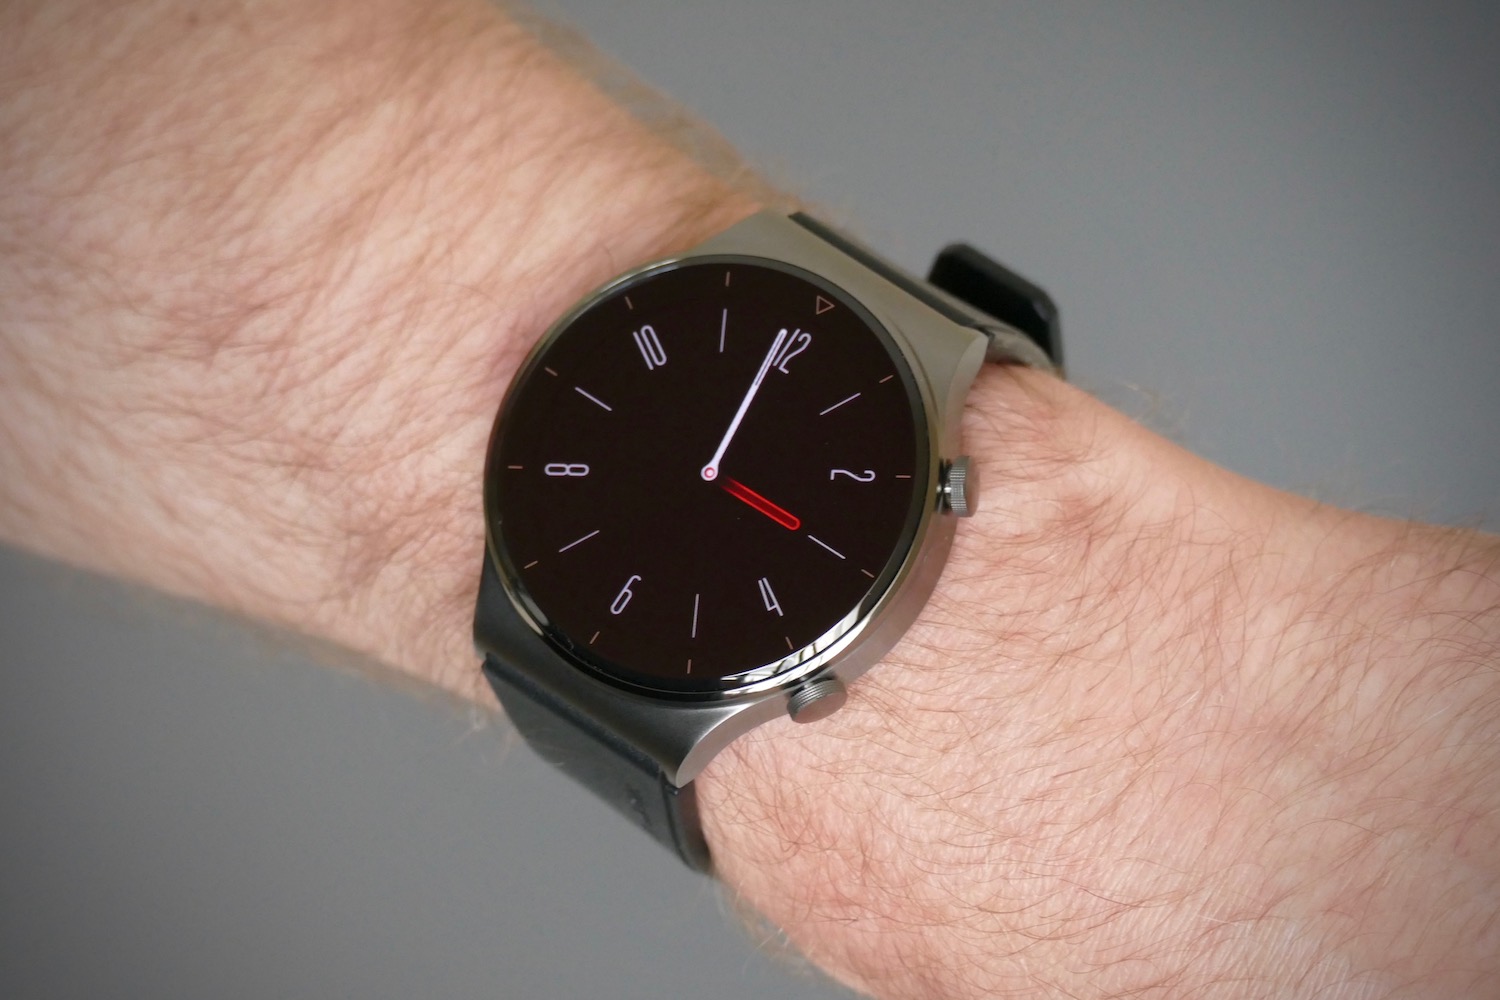 Huawei Watch Pro Review: Upscale Fitness Watch Digital Trends